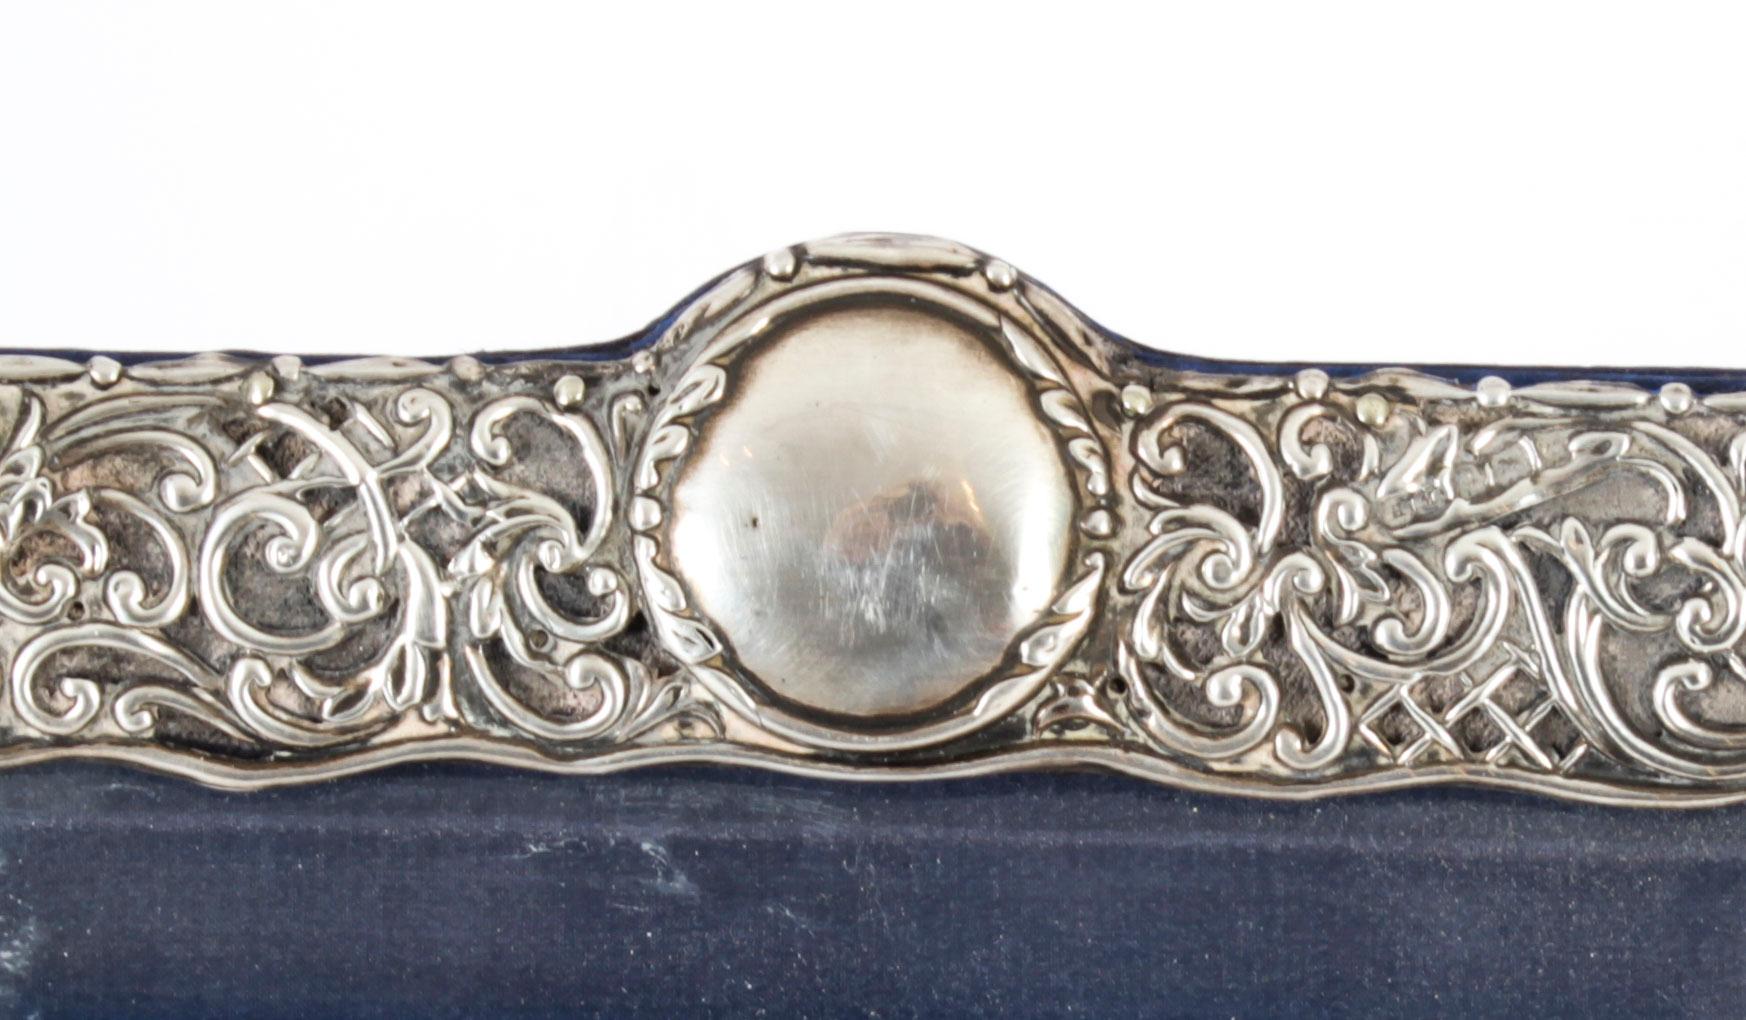 Edwardian Antique Sterling Silver Photo Frame by Henry Matthews 1902